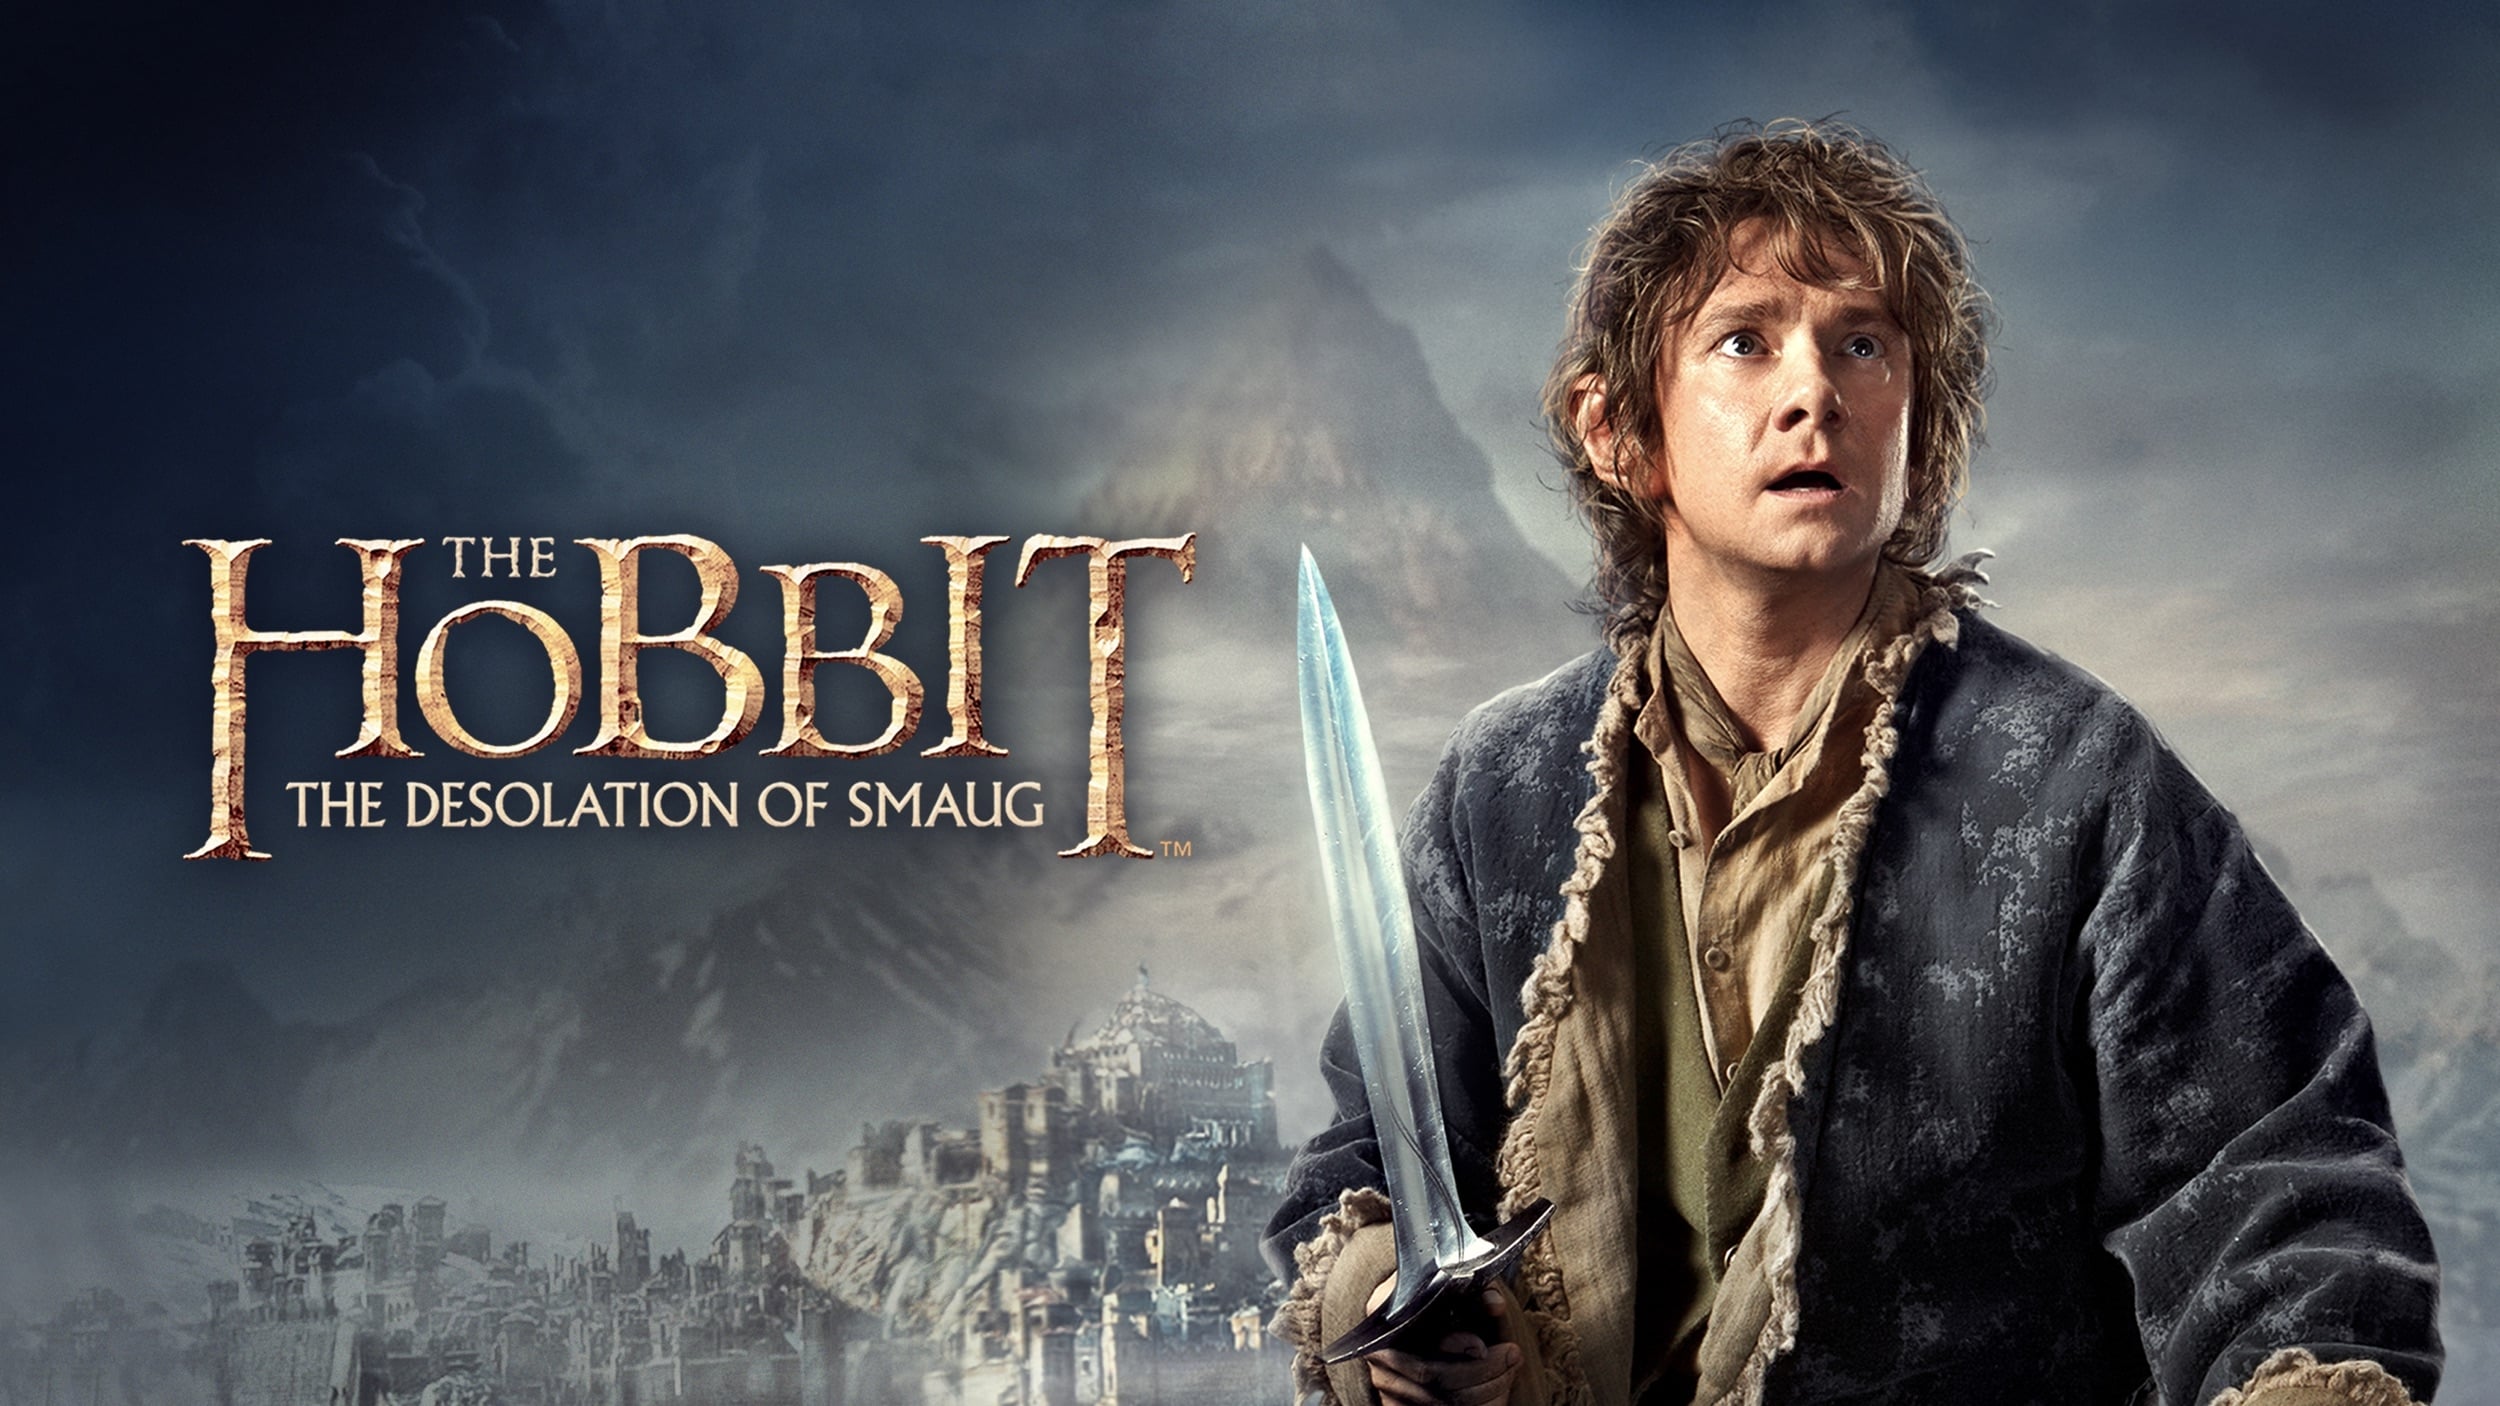 download the new version for apple The Hobbit: The Desolation of Smaug